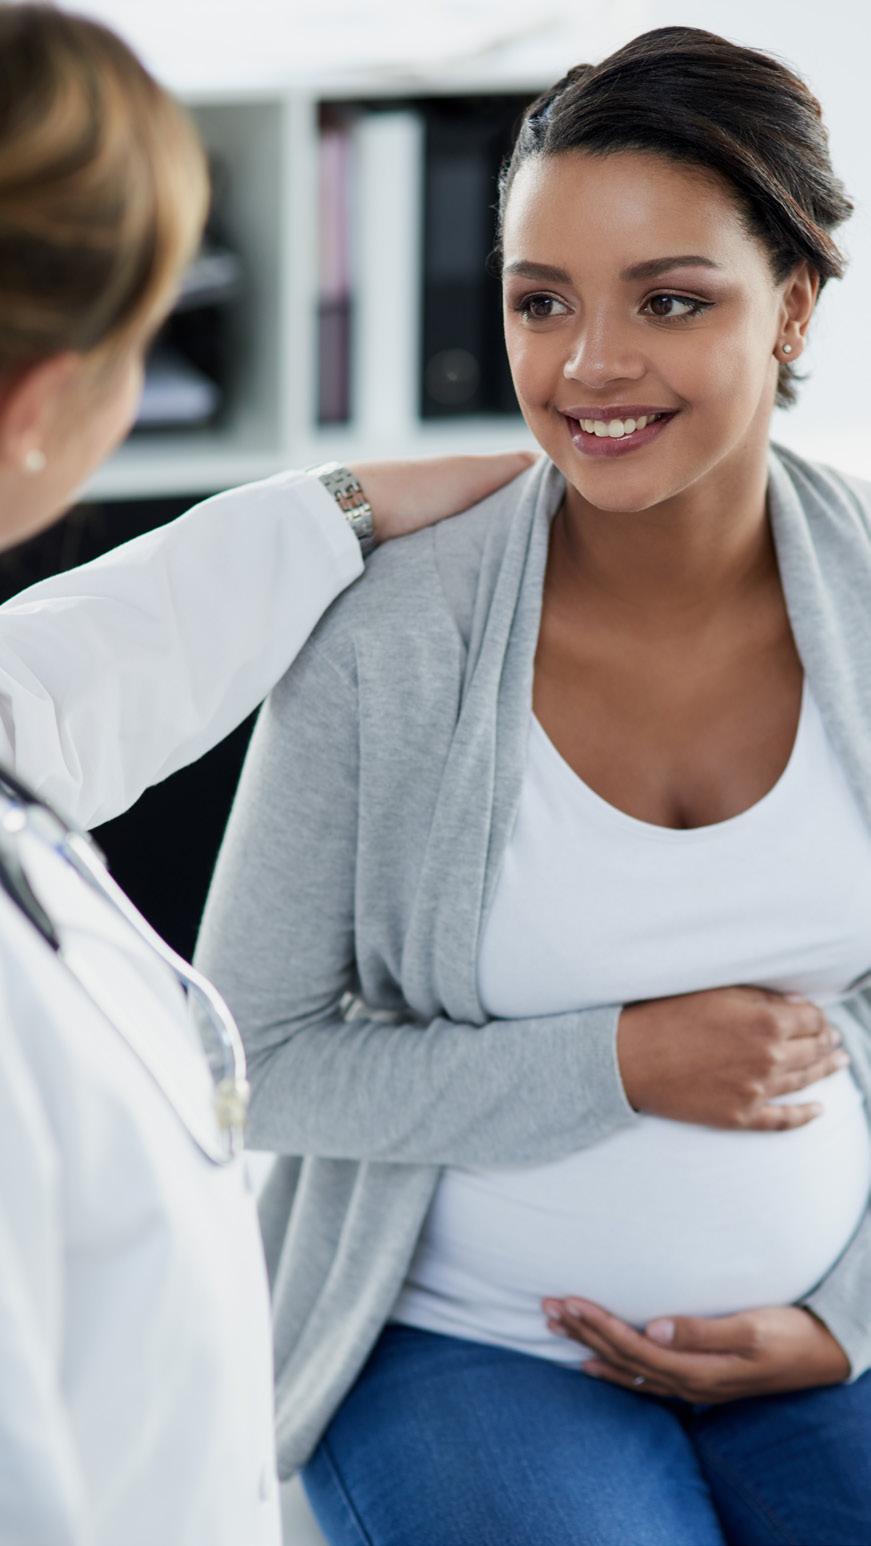 CLINICAL CONNECTIONS SUPPORTING UNIVERSAL PREGNANCY-RELATED DEPRESSION SCREENING ACROSS A HEALTH SYSTEM In September 2017 Denver Public Health and Denver Health celebrated a major milestone universal